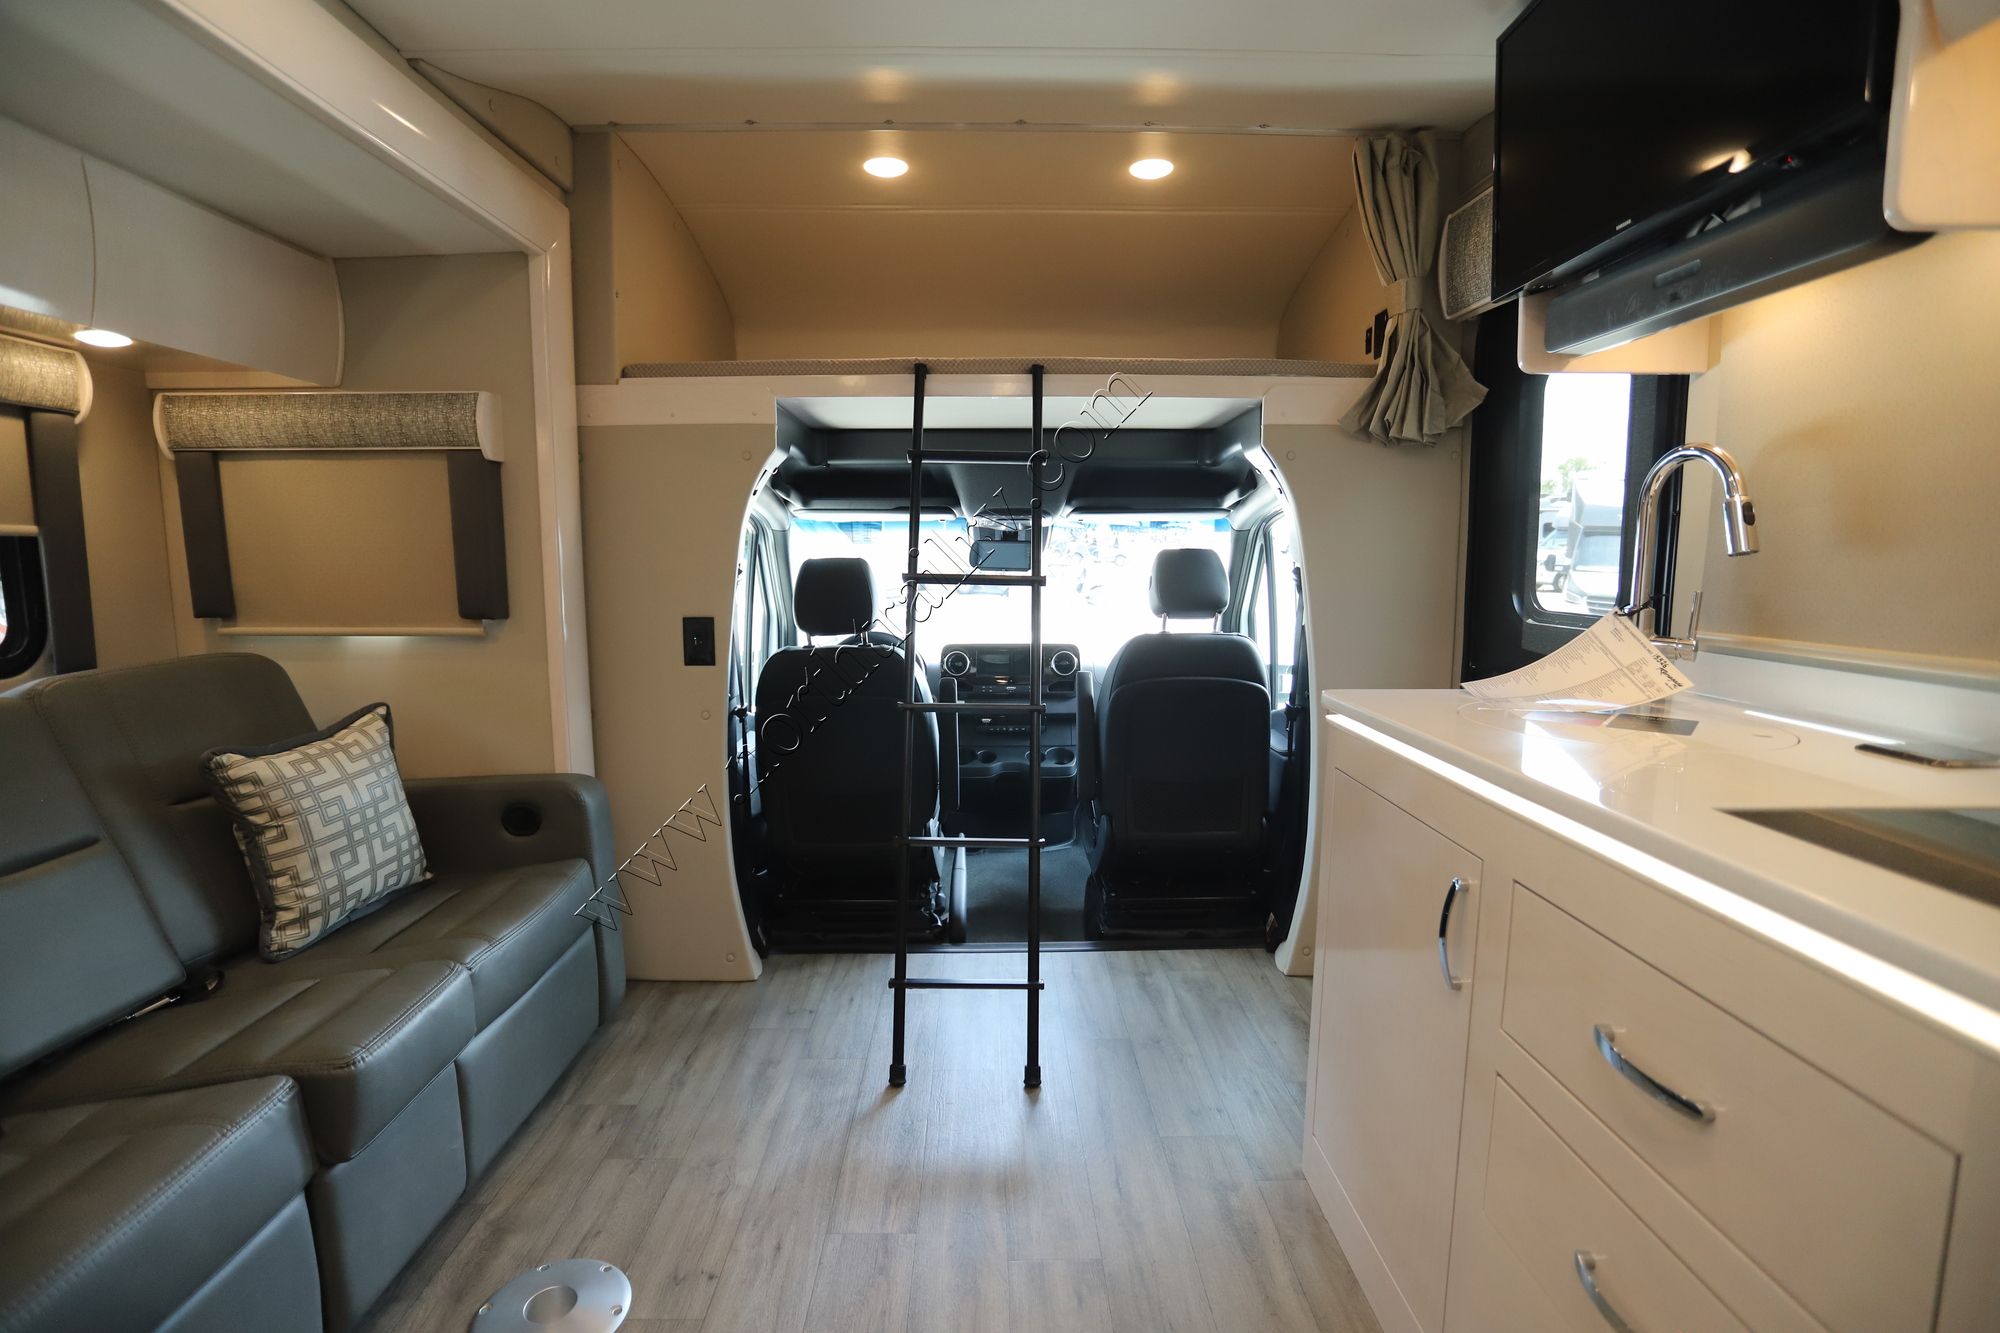 New 2023 Renegade Rv Vienna 25VFWC Class C  For Sale